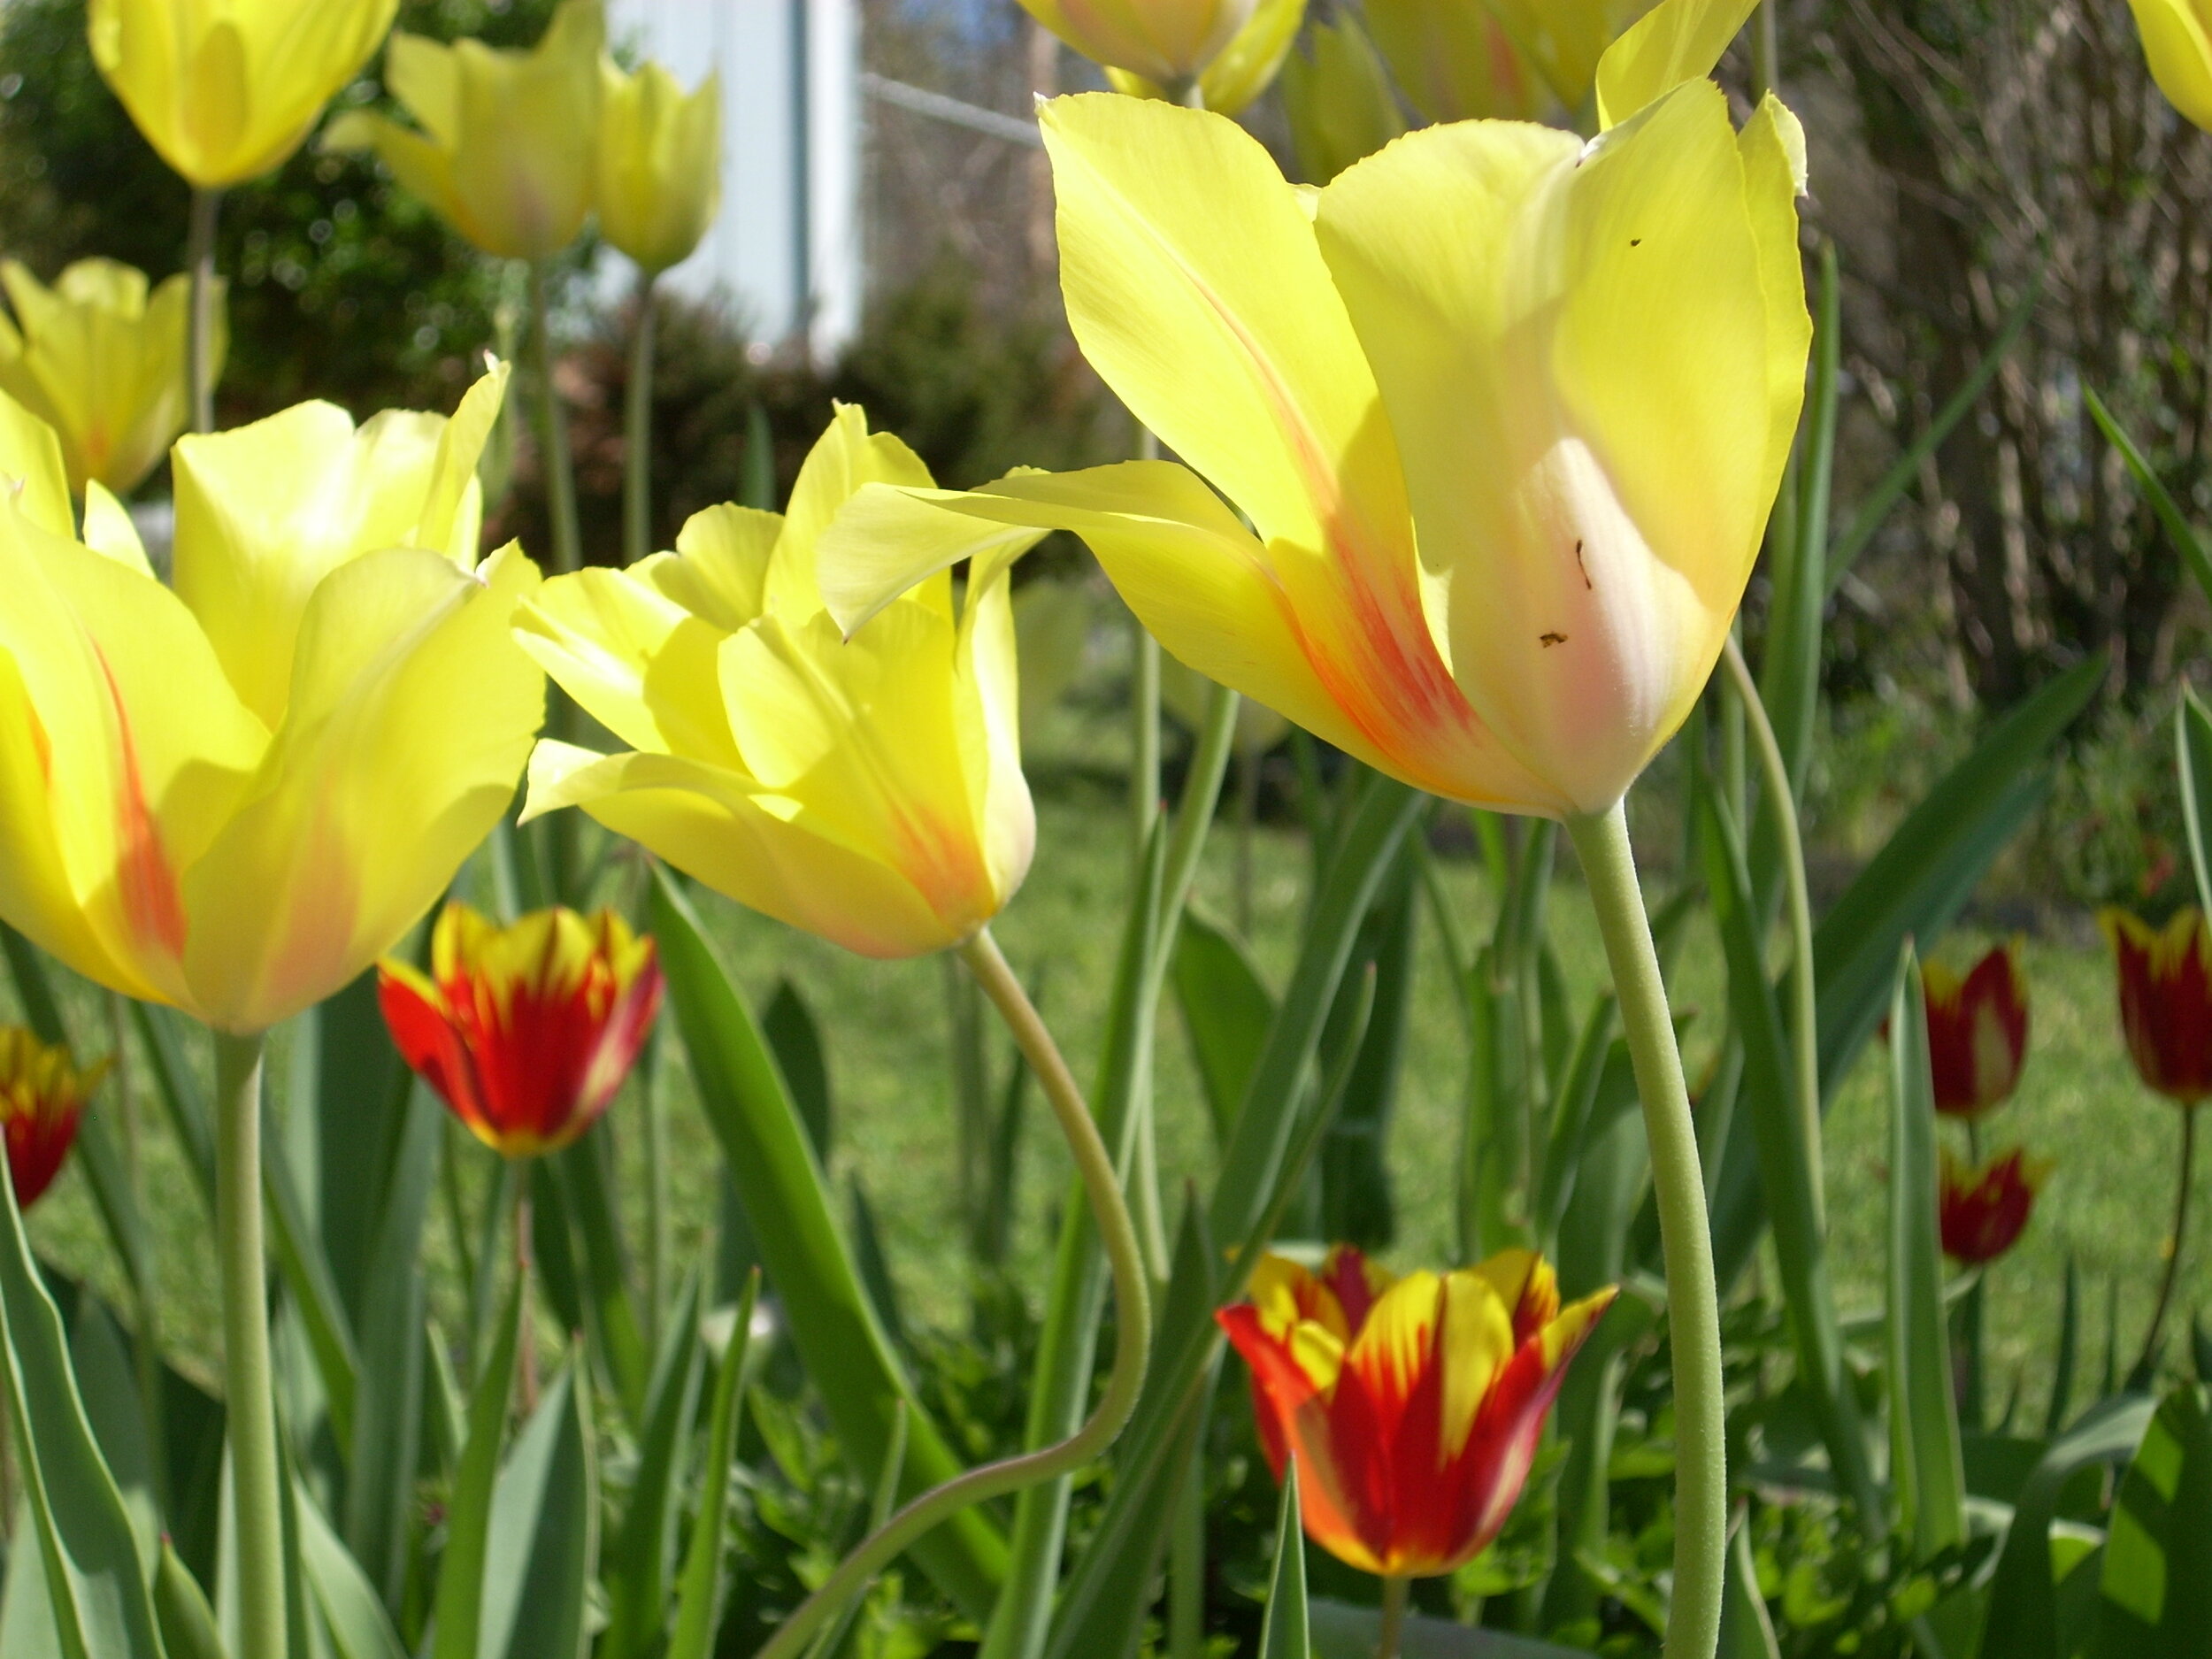 yellow and red tulips.jpg